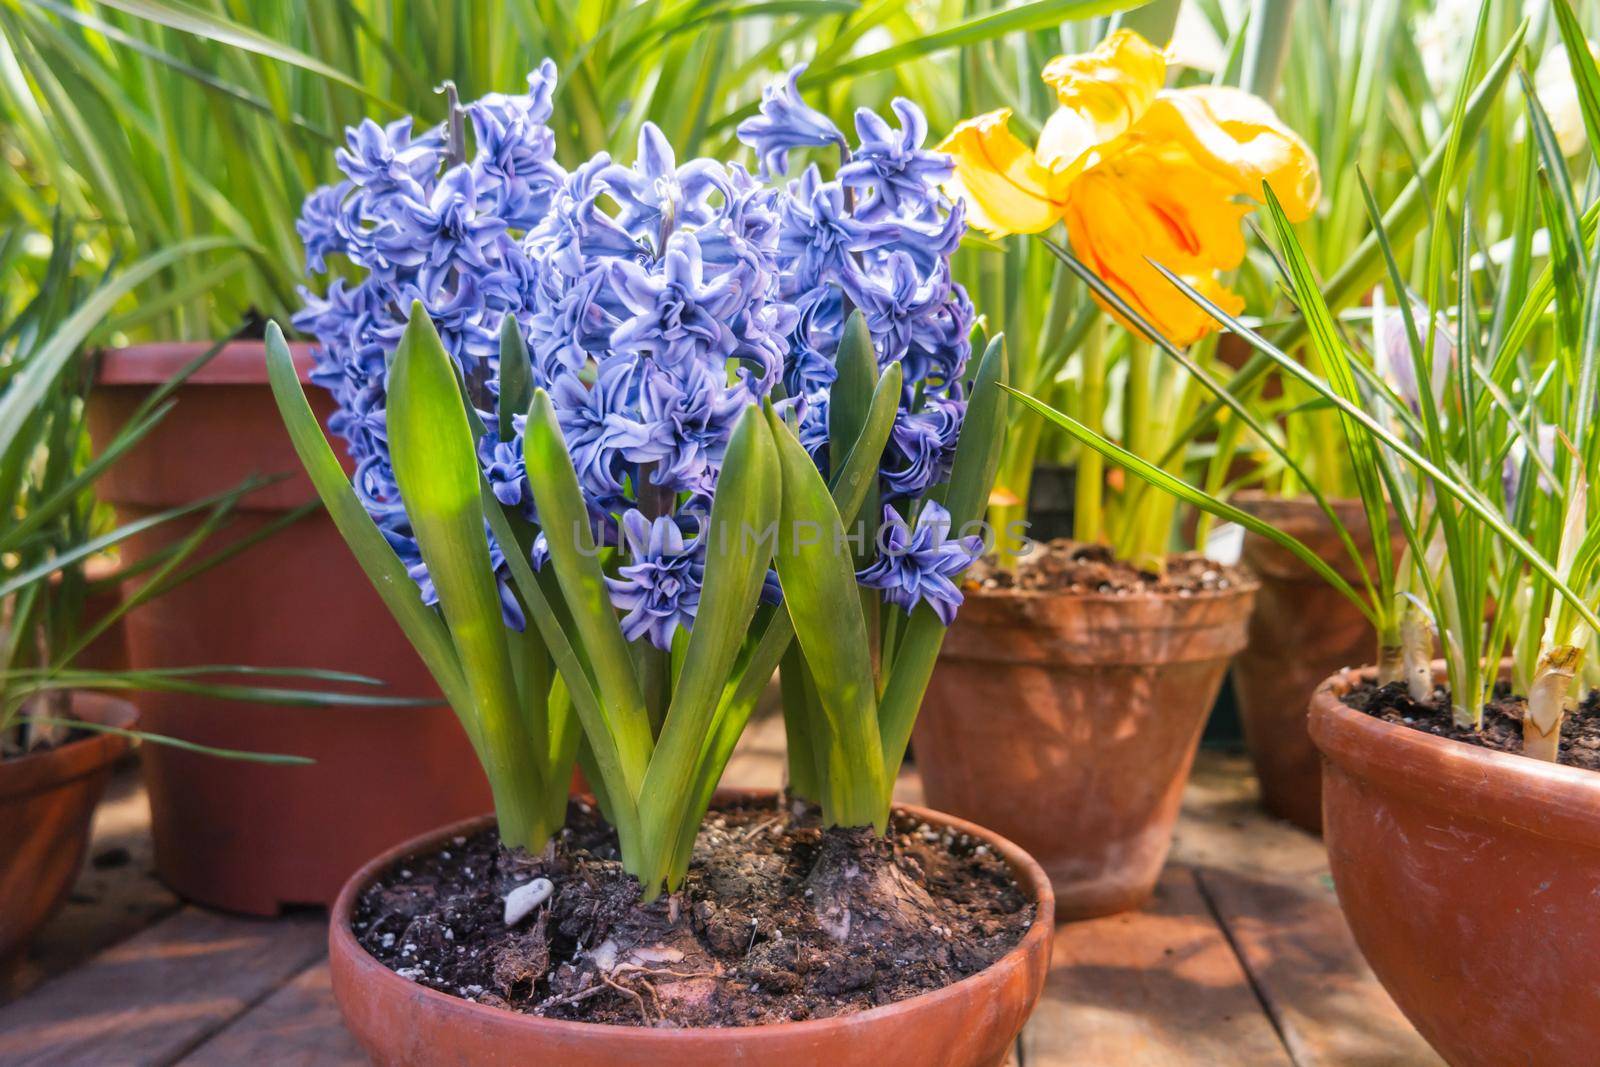 Hyacinth flowers makes the way through ground in flower pot. Growing flowers in spring as anti stress hobby. Natural spring background. by aksenovko